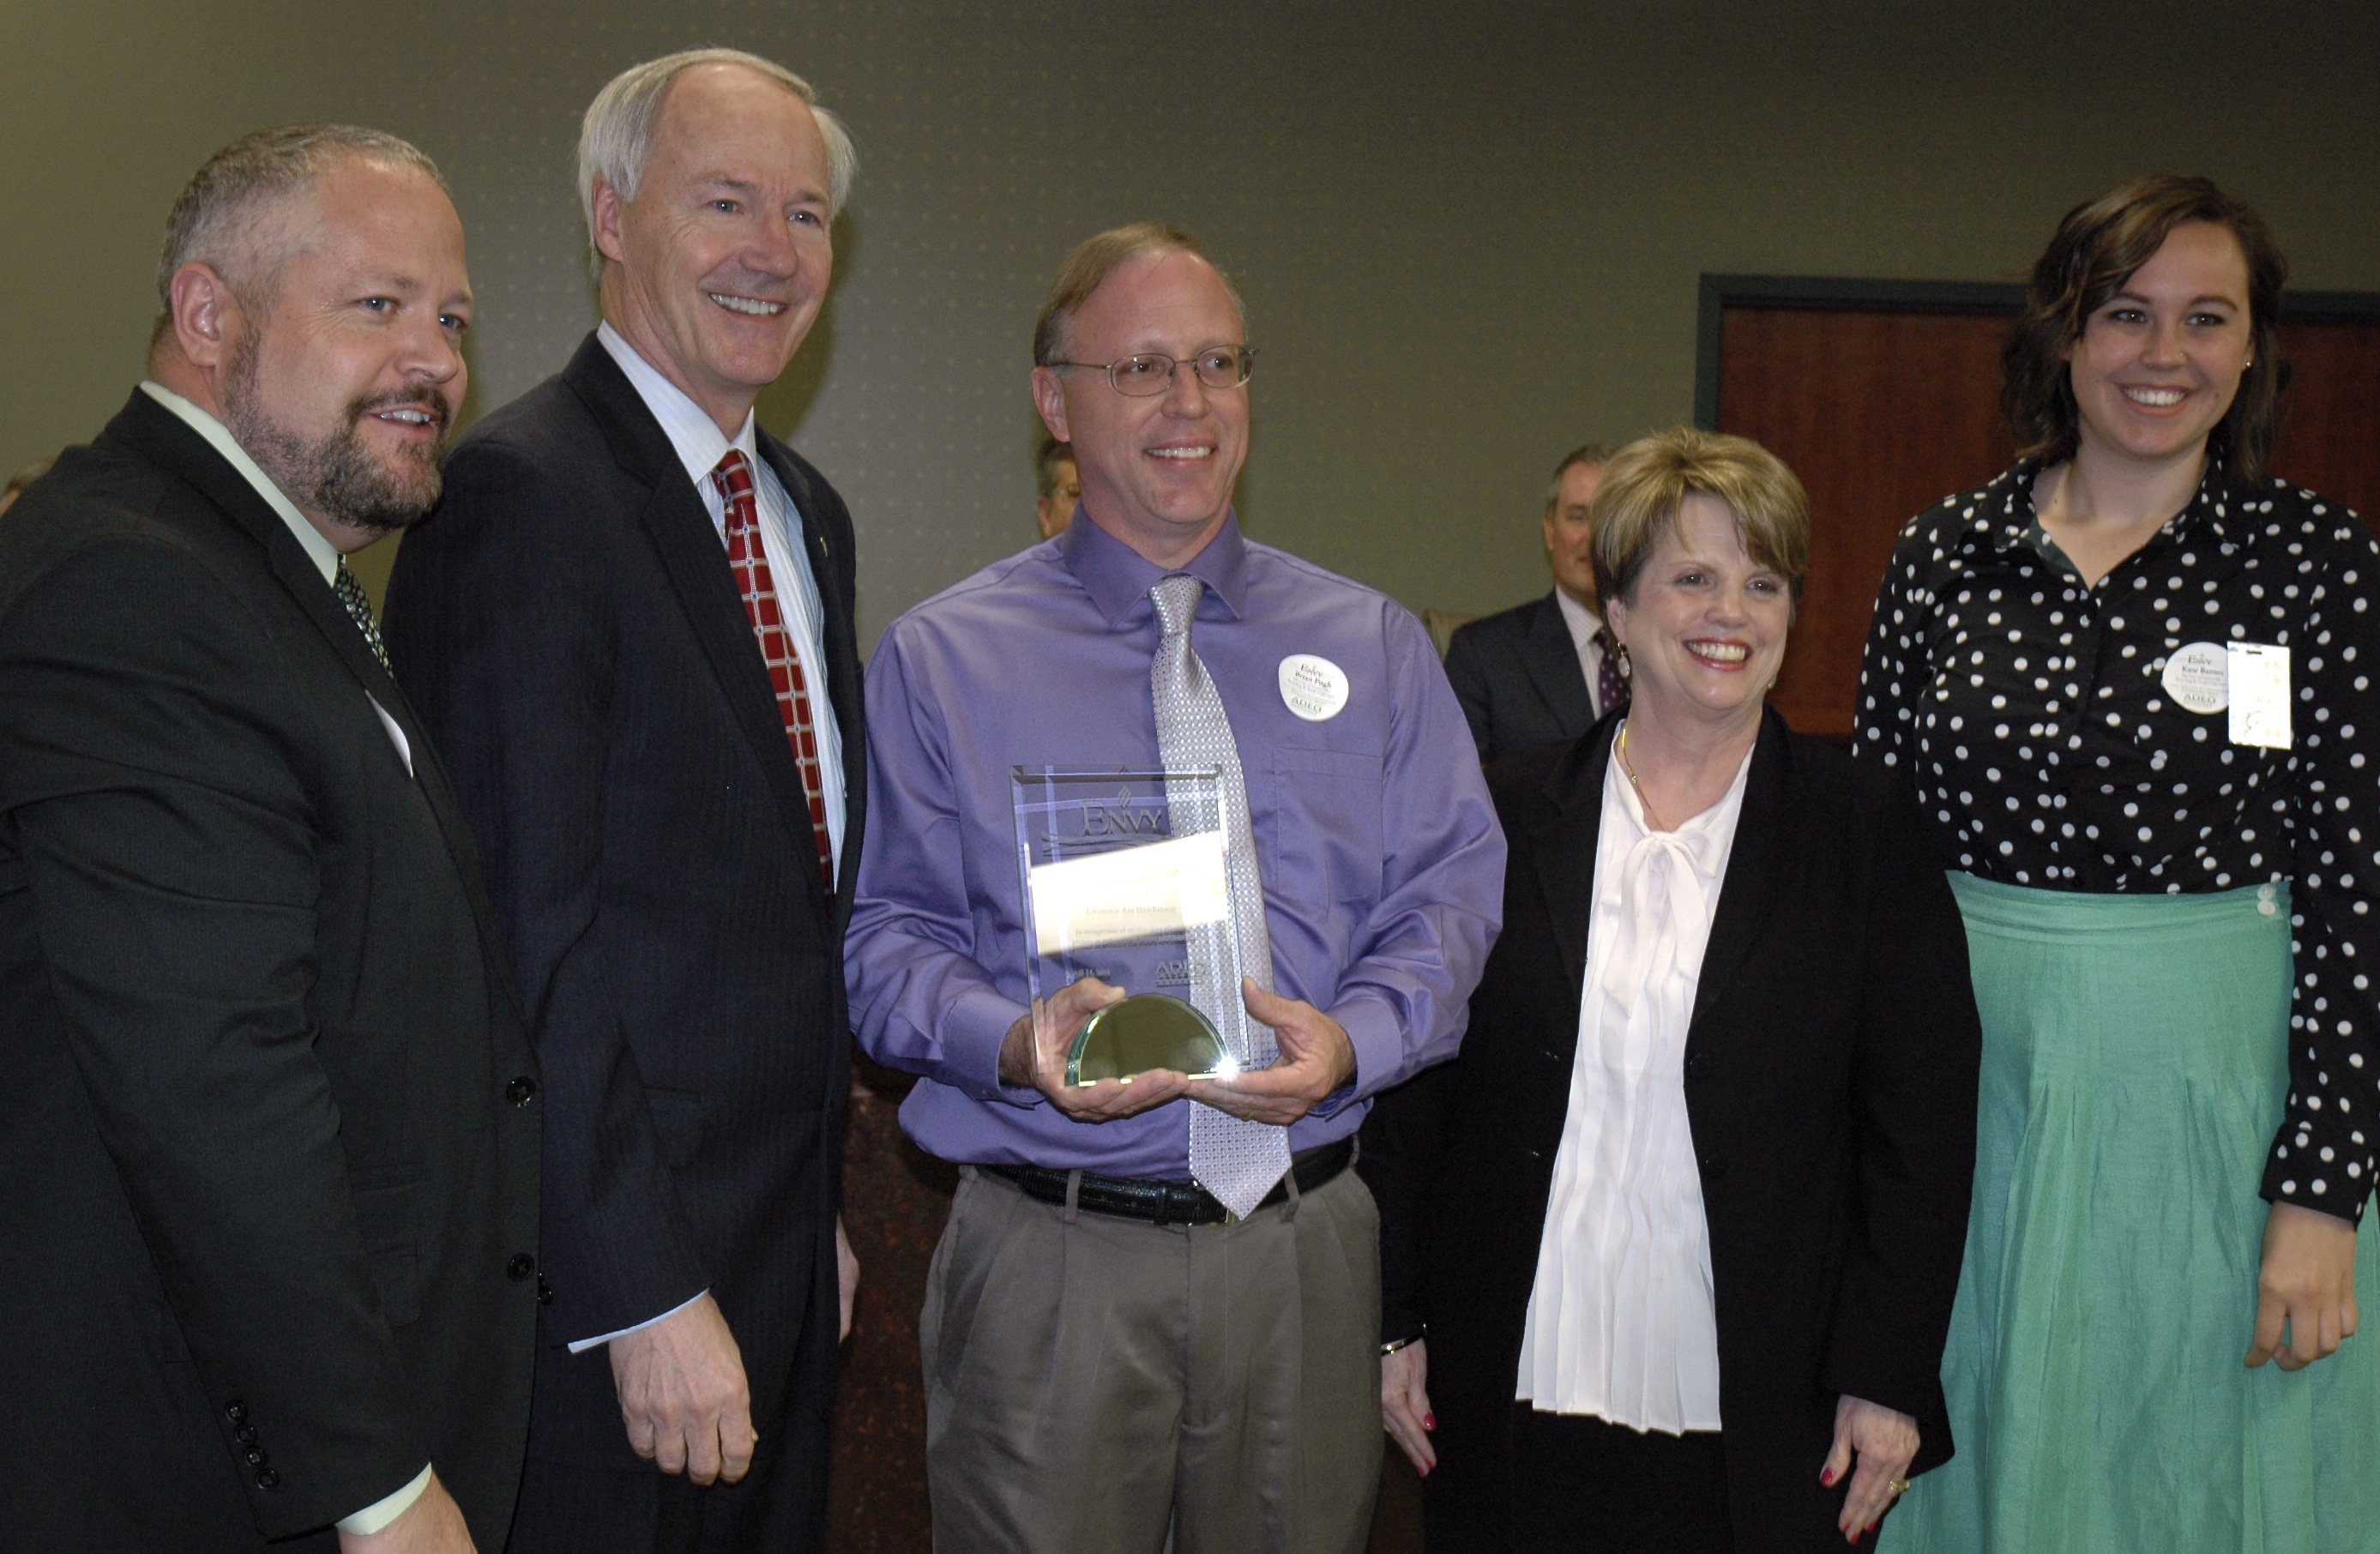 (Left to Right) Don Marr, Governor Asa Hutchinson, Brian Pugh, ADEQ Director Becky Keogh, Kate Barnes